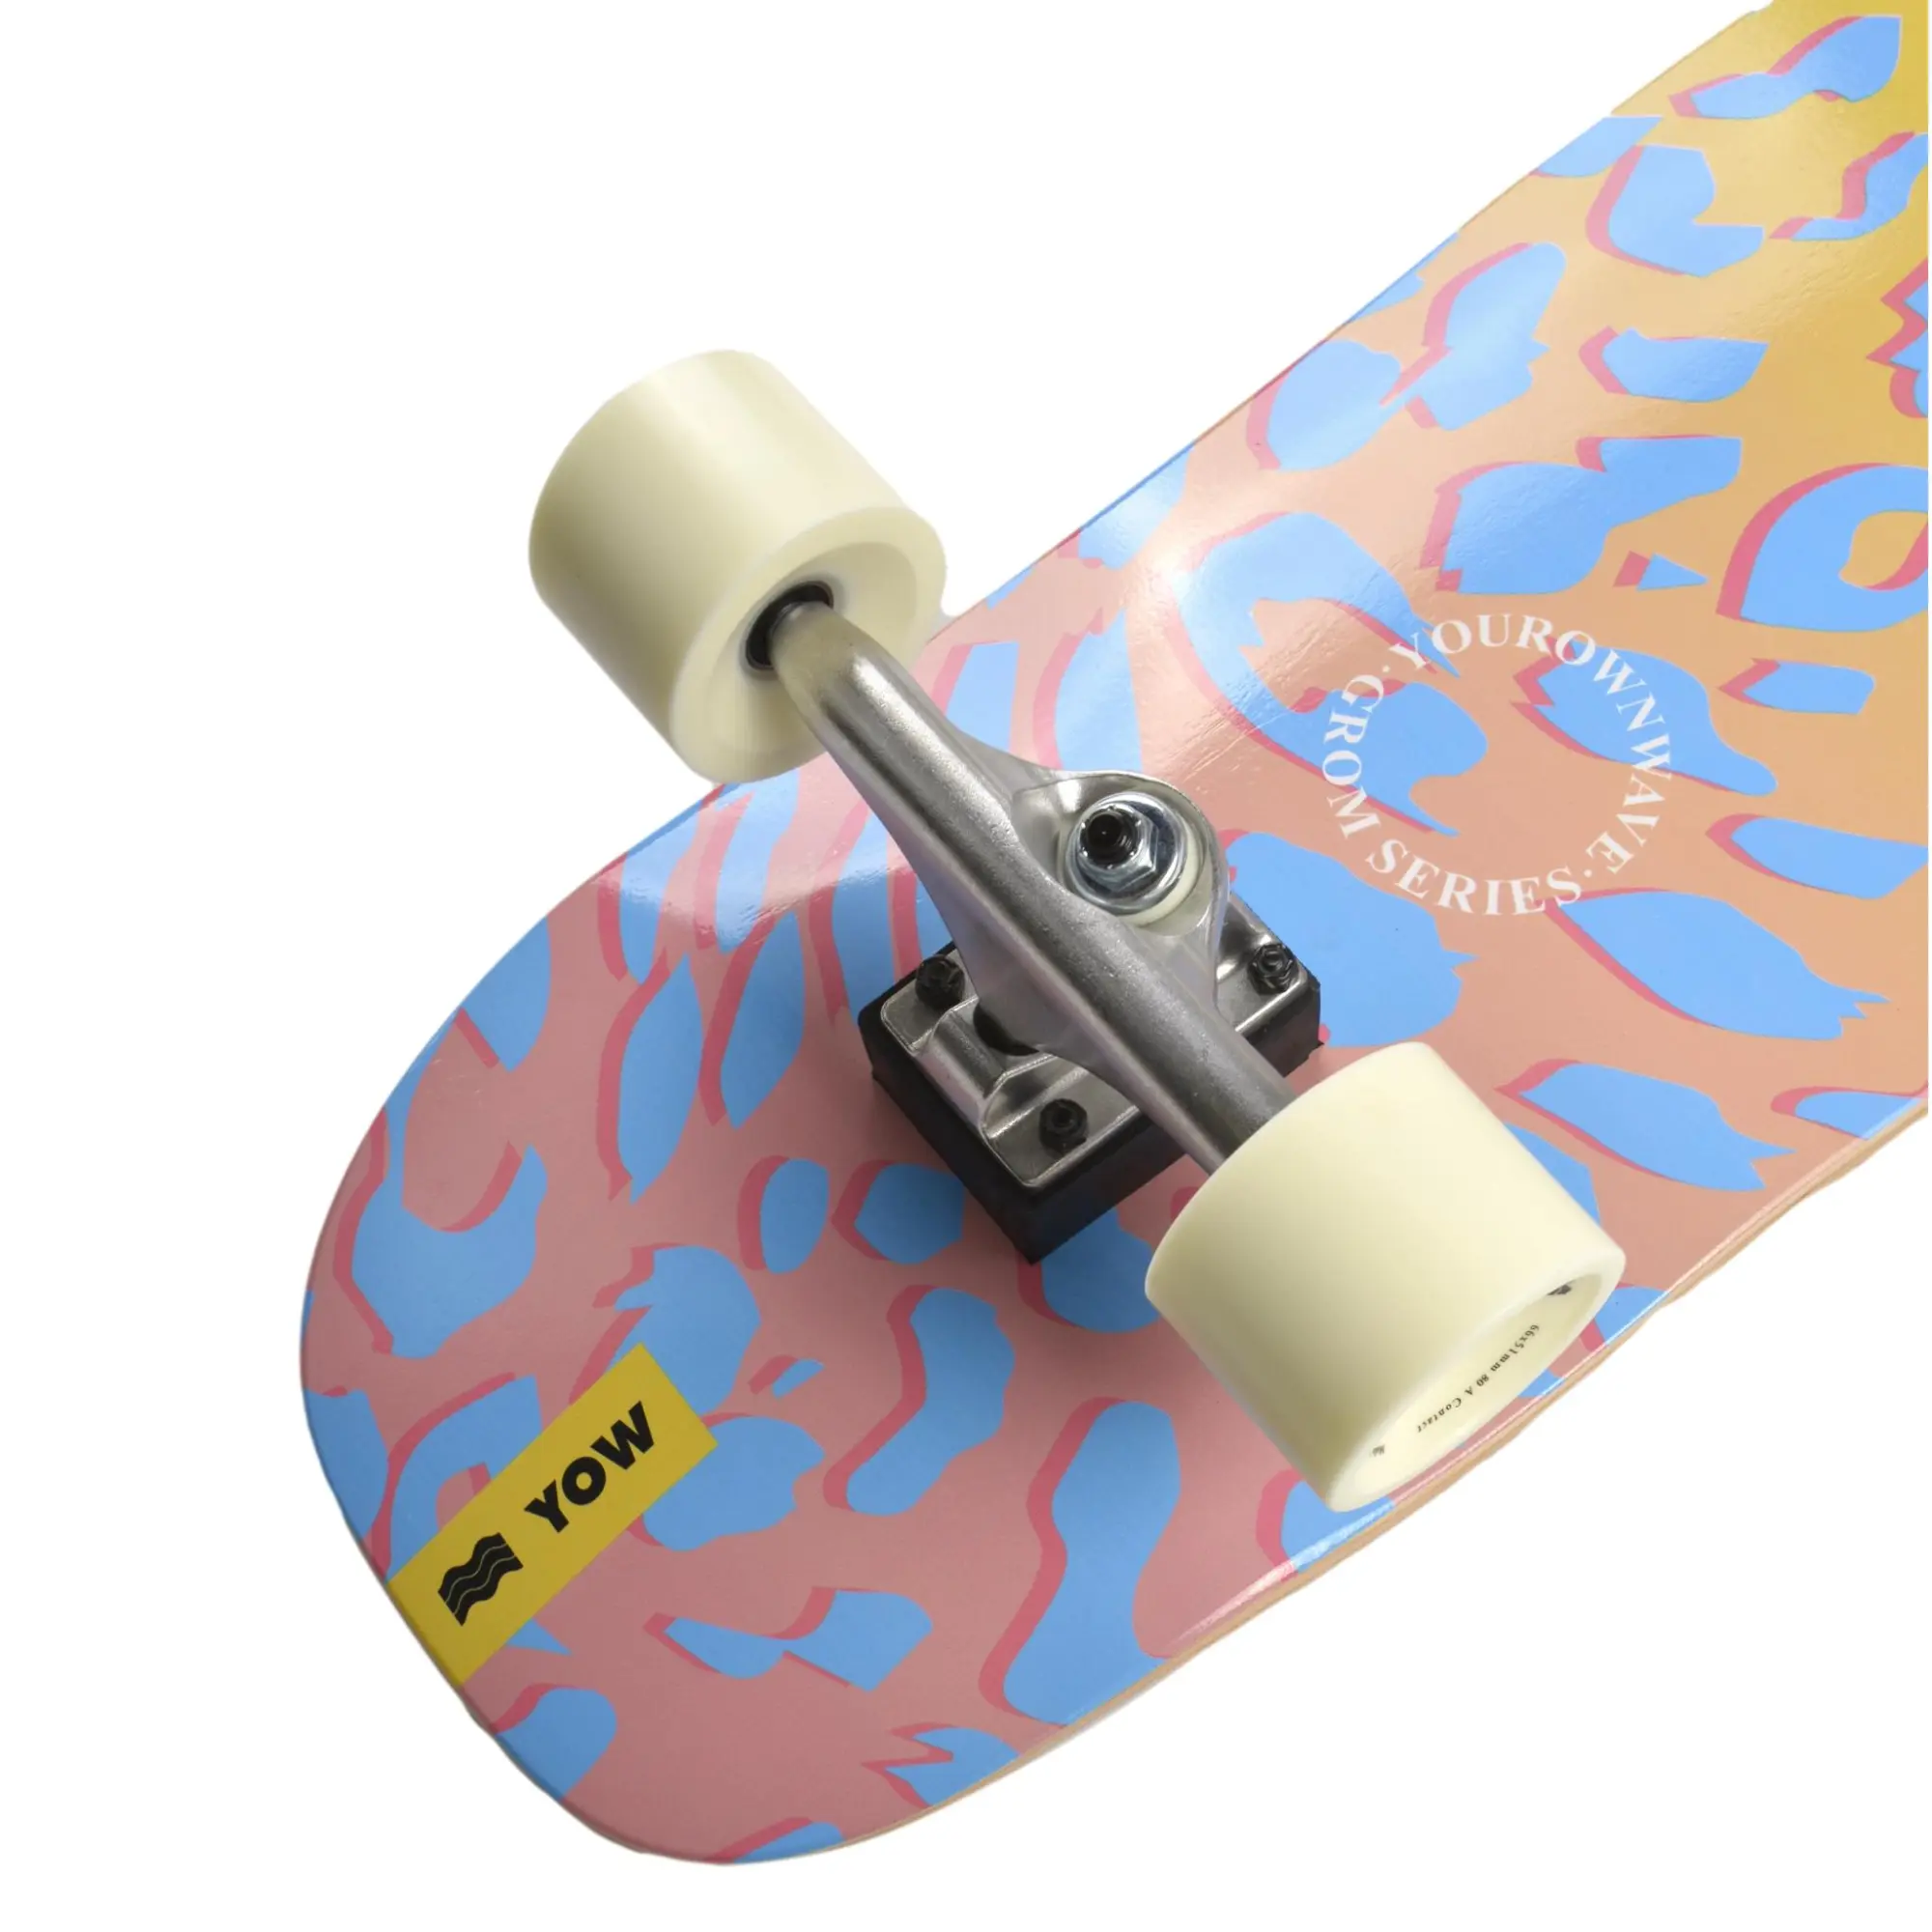 Yow Surfskate Snappers Grom Series 32